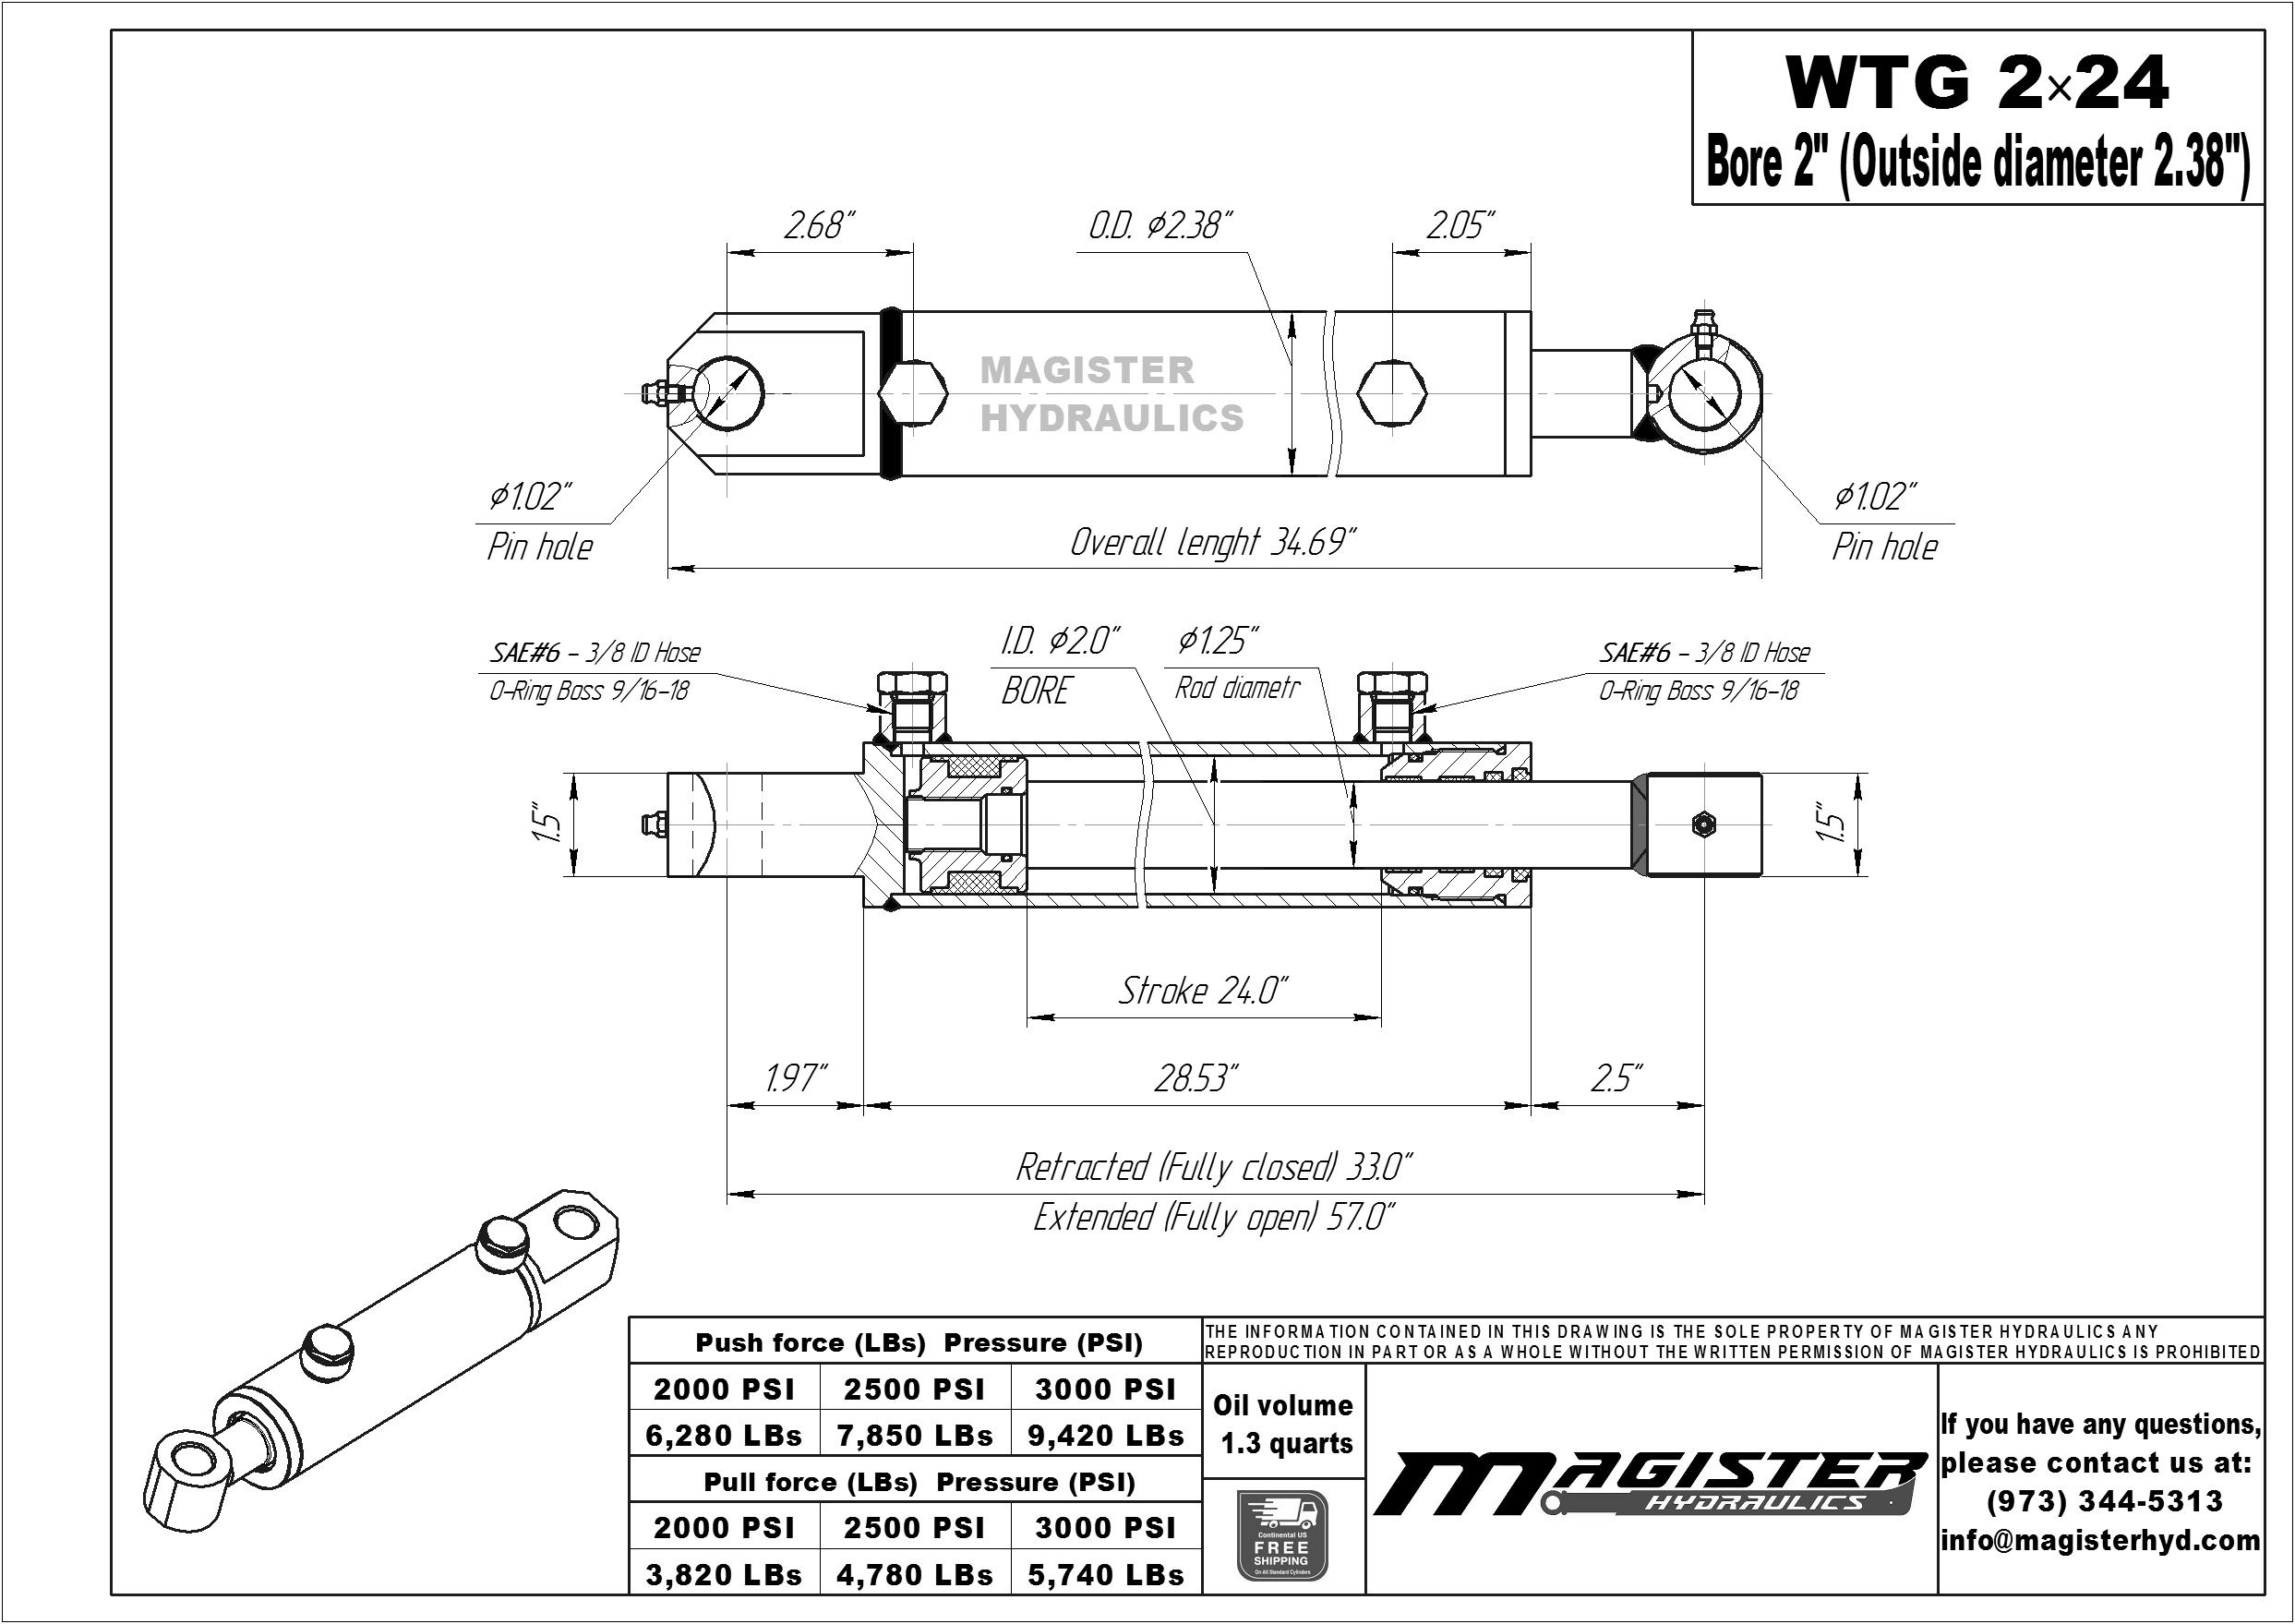 Hydraulic Cylinder Welded Double Acting 2" Bore 24" Stroke Tang 2x24 WTG for sale online 